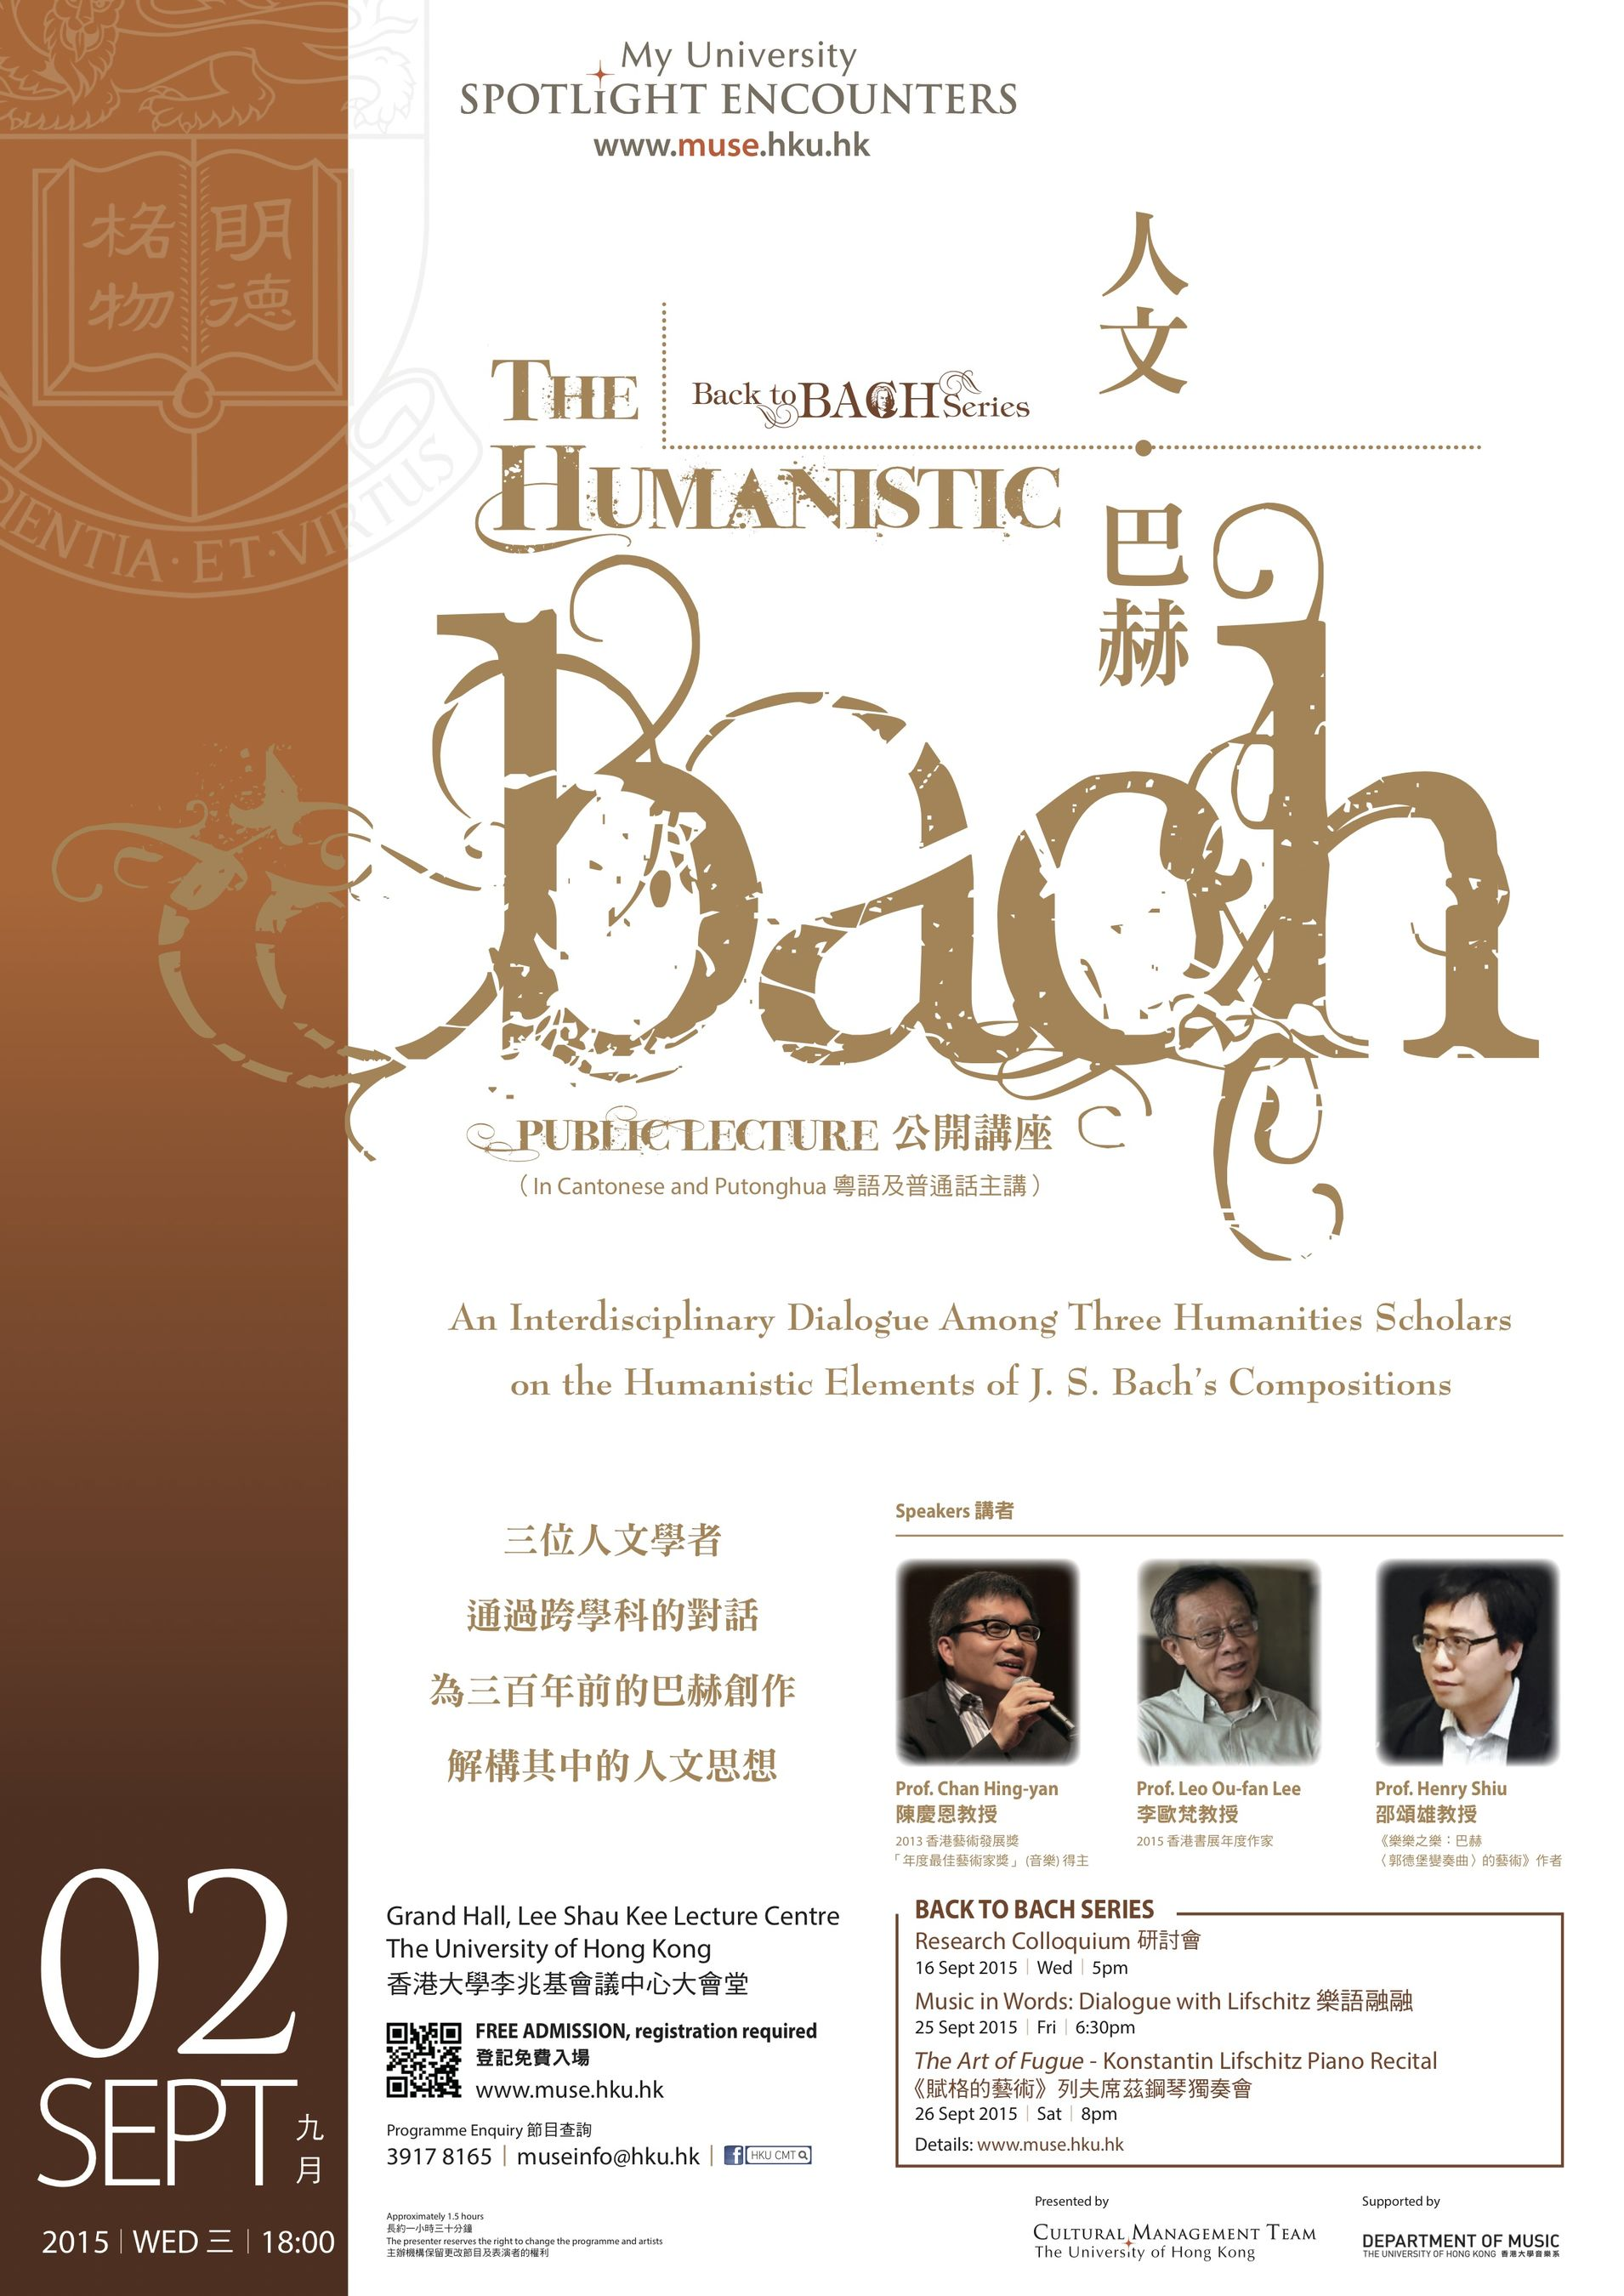 Public Lecture 公開講座 - The Humanistic Bach 人文 ‧ 巴赫 